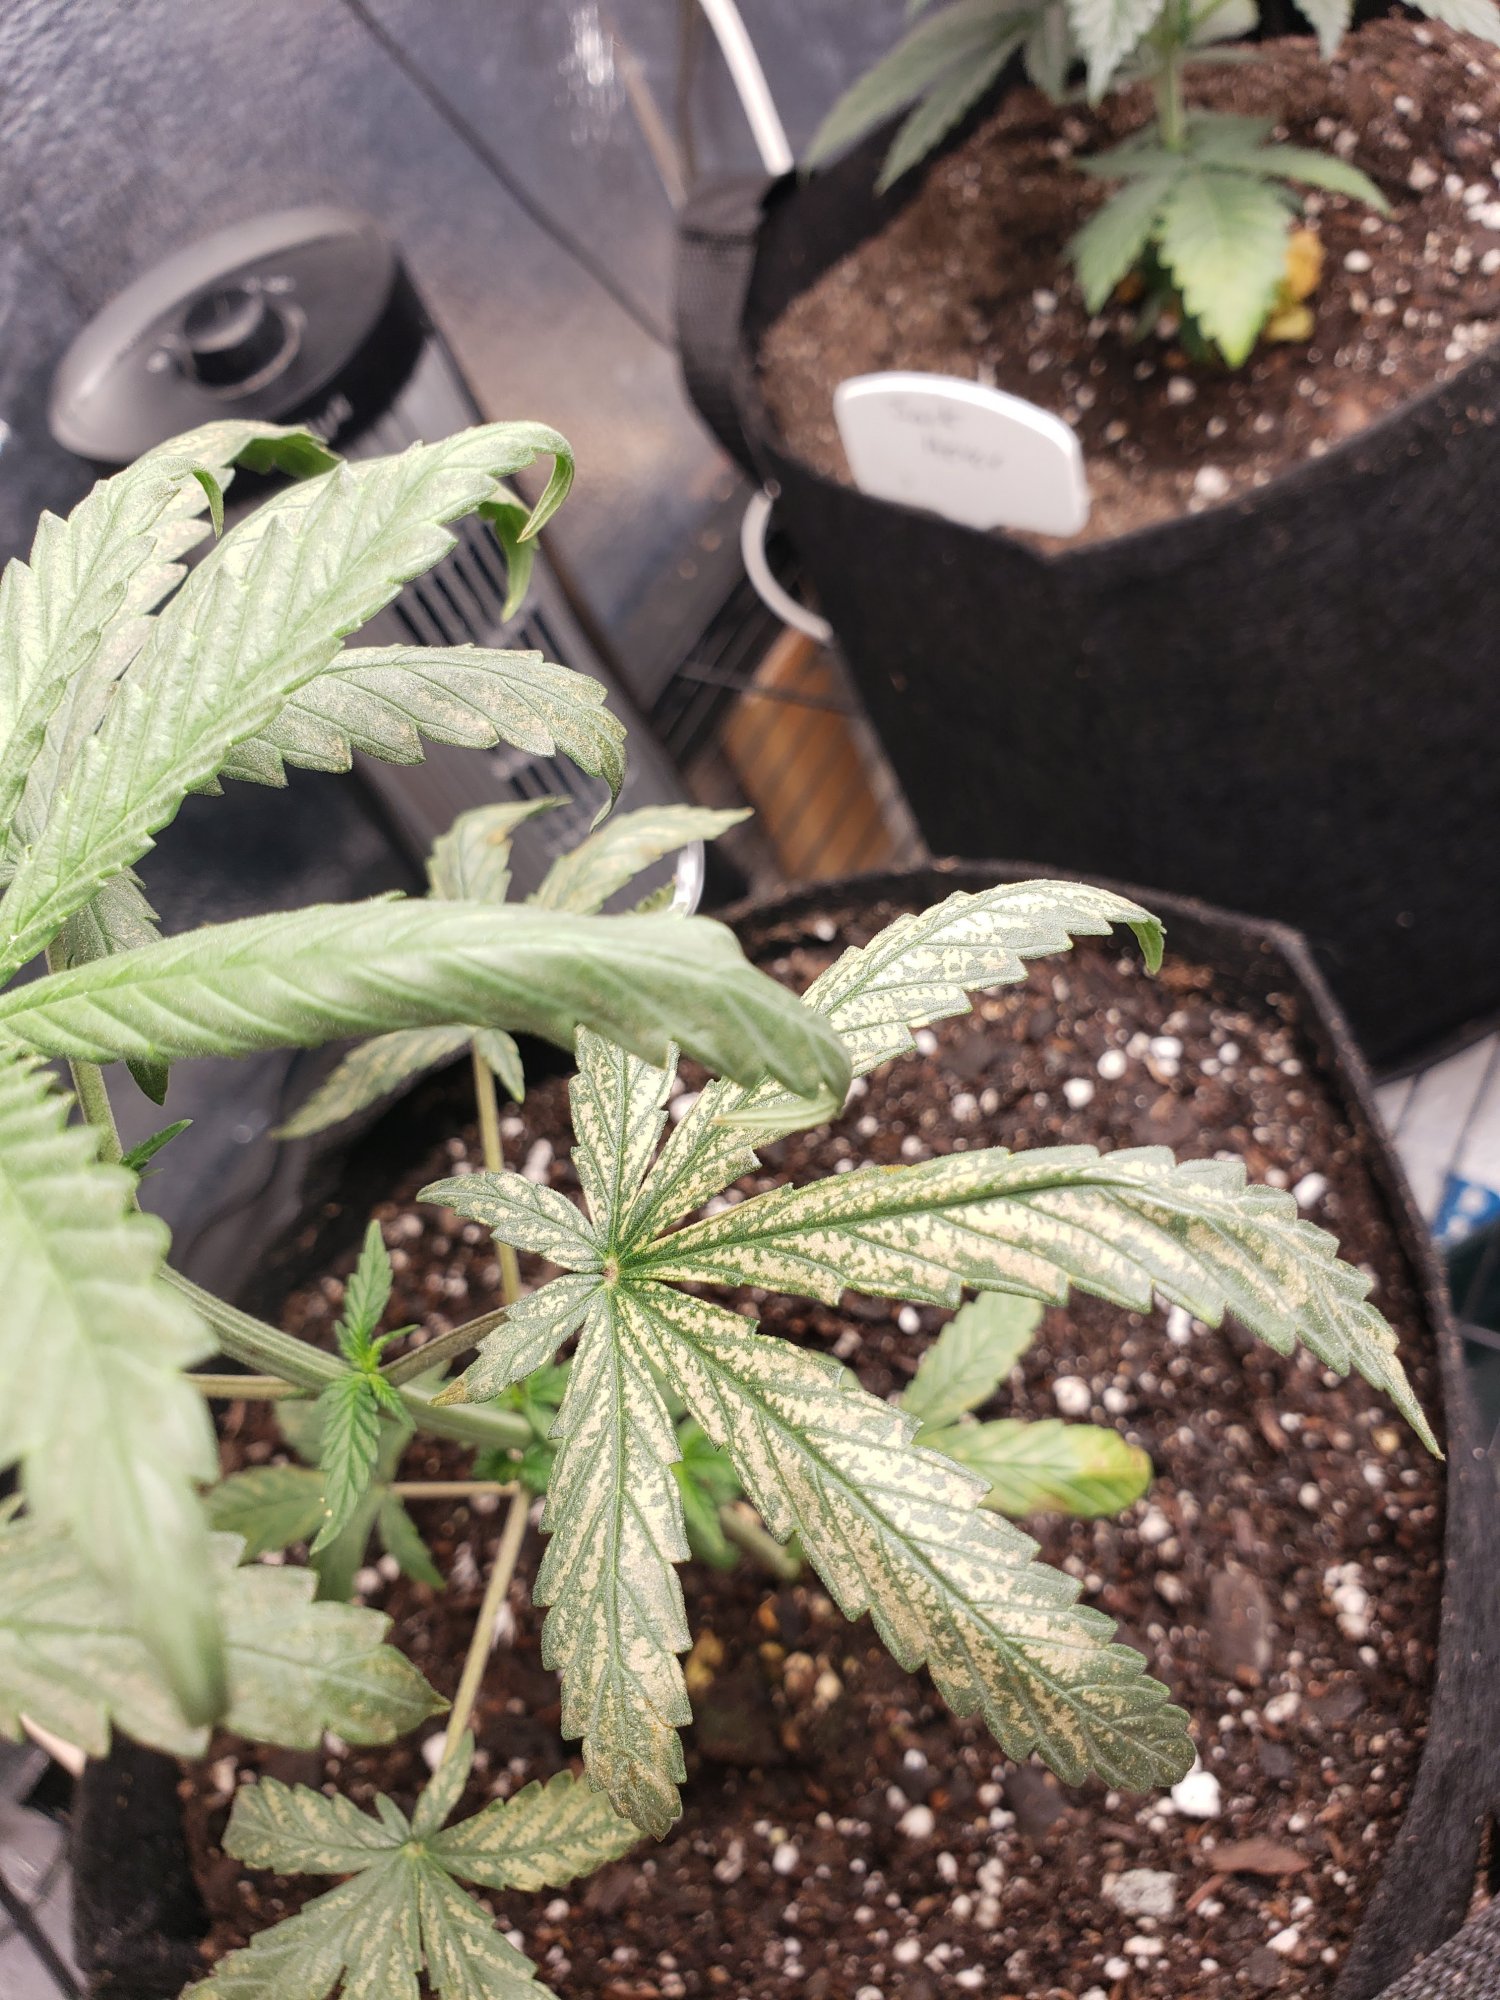 Leaves suddenly changed not sure if bugs nutrients or ph